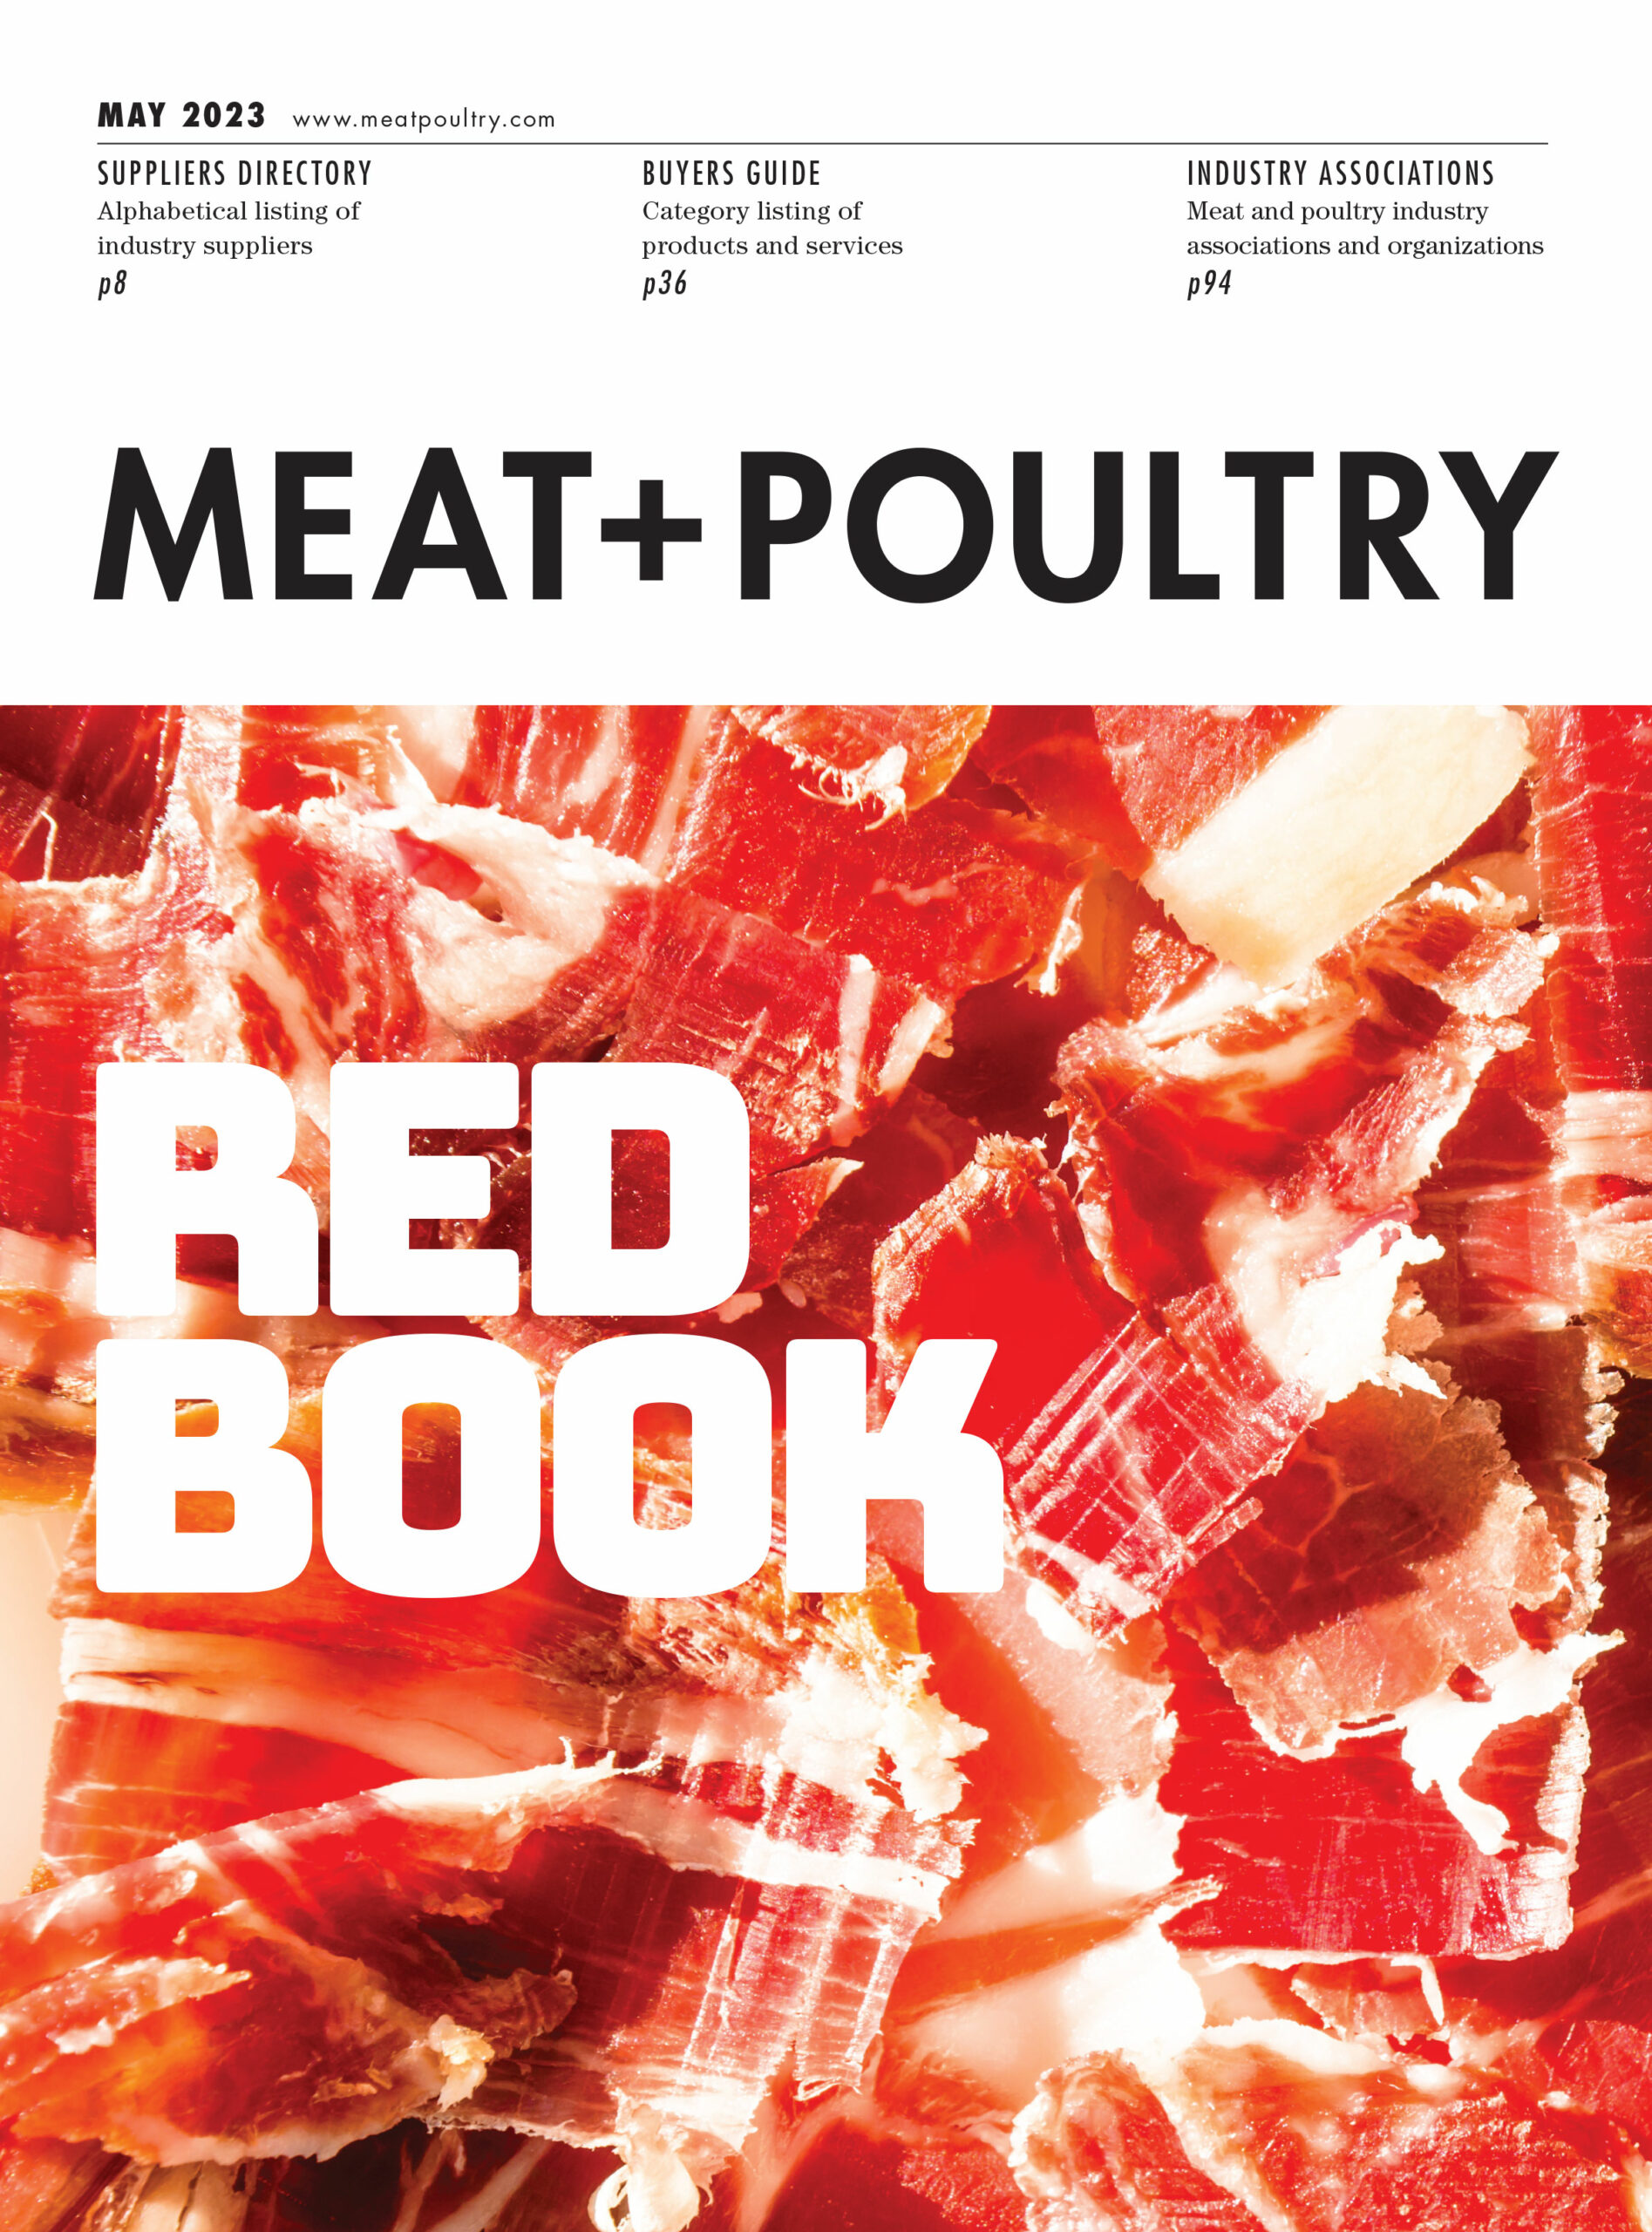 MEAT+POULTRY Red Book